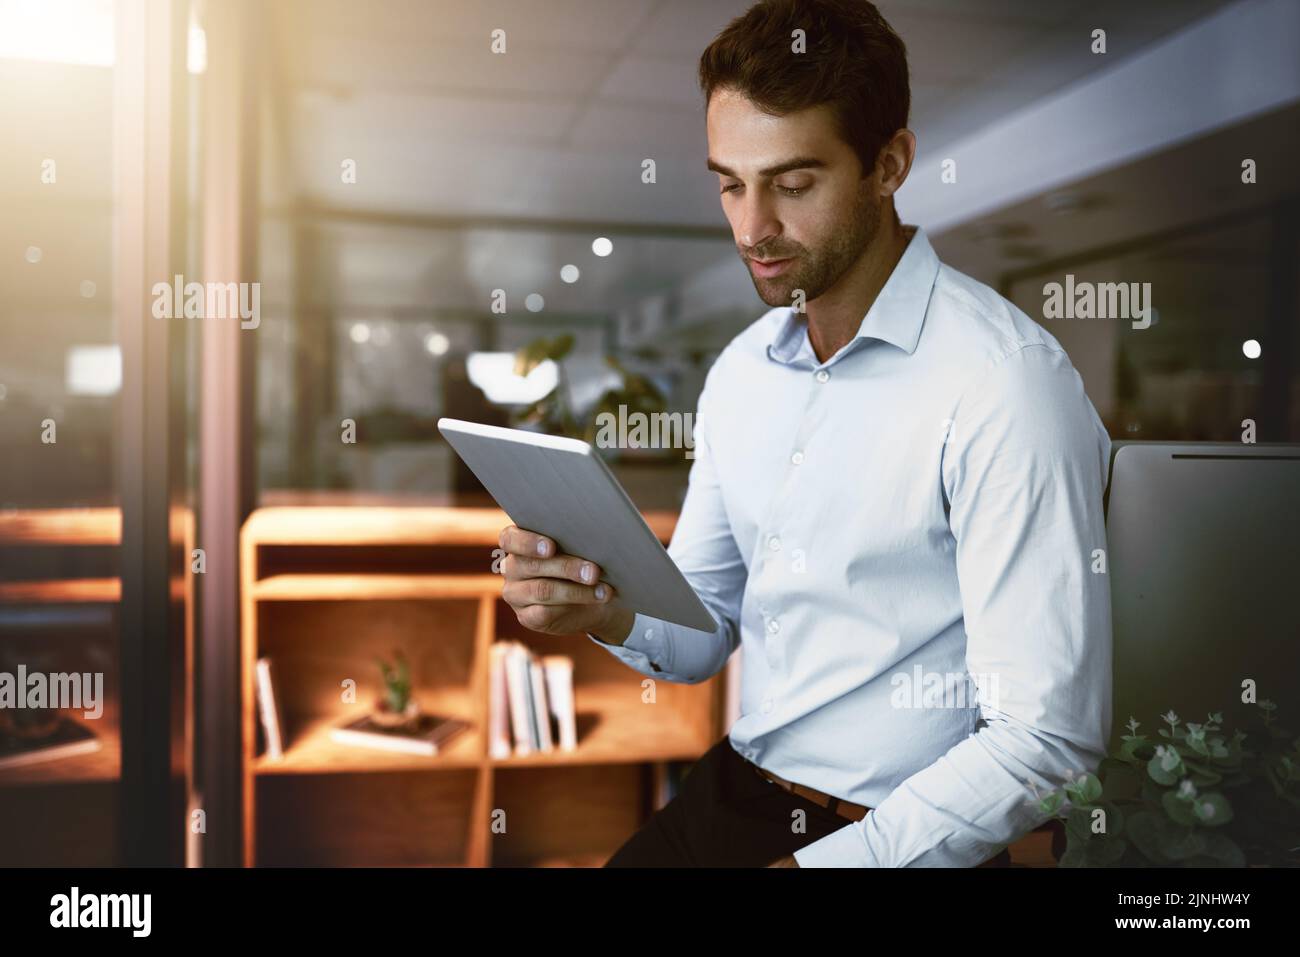 Knocking out deadline after deadline. a young businessman working late on a digital tablet in an office. Stock Photo